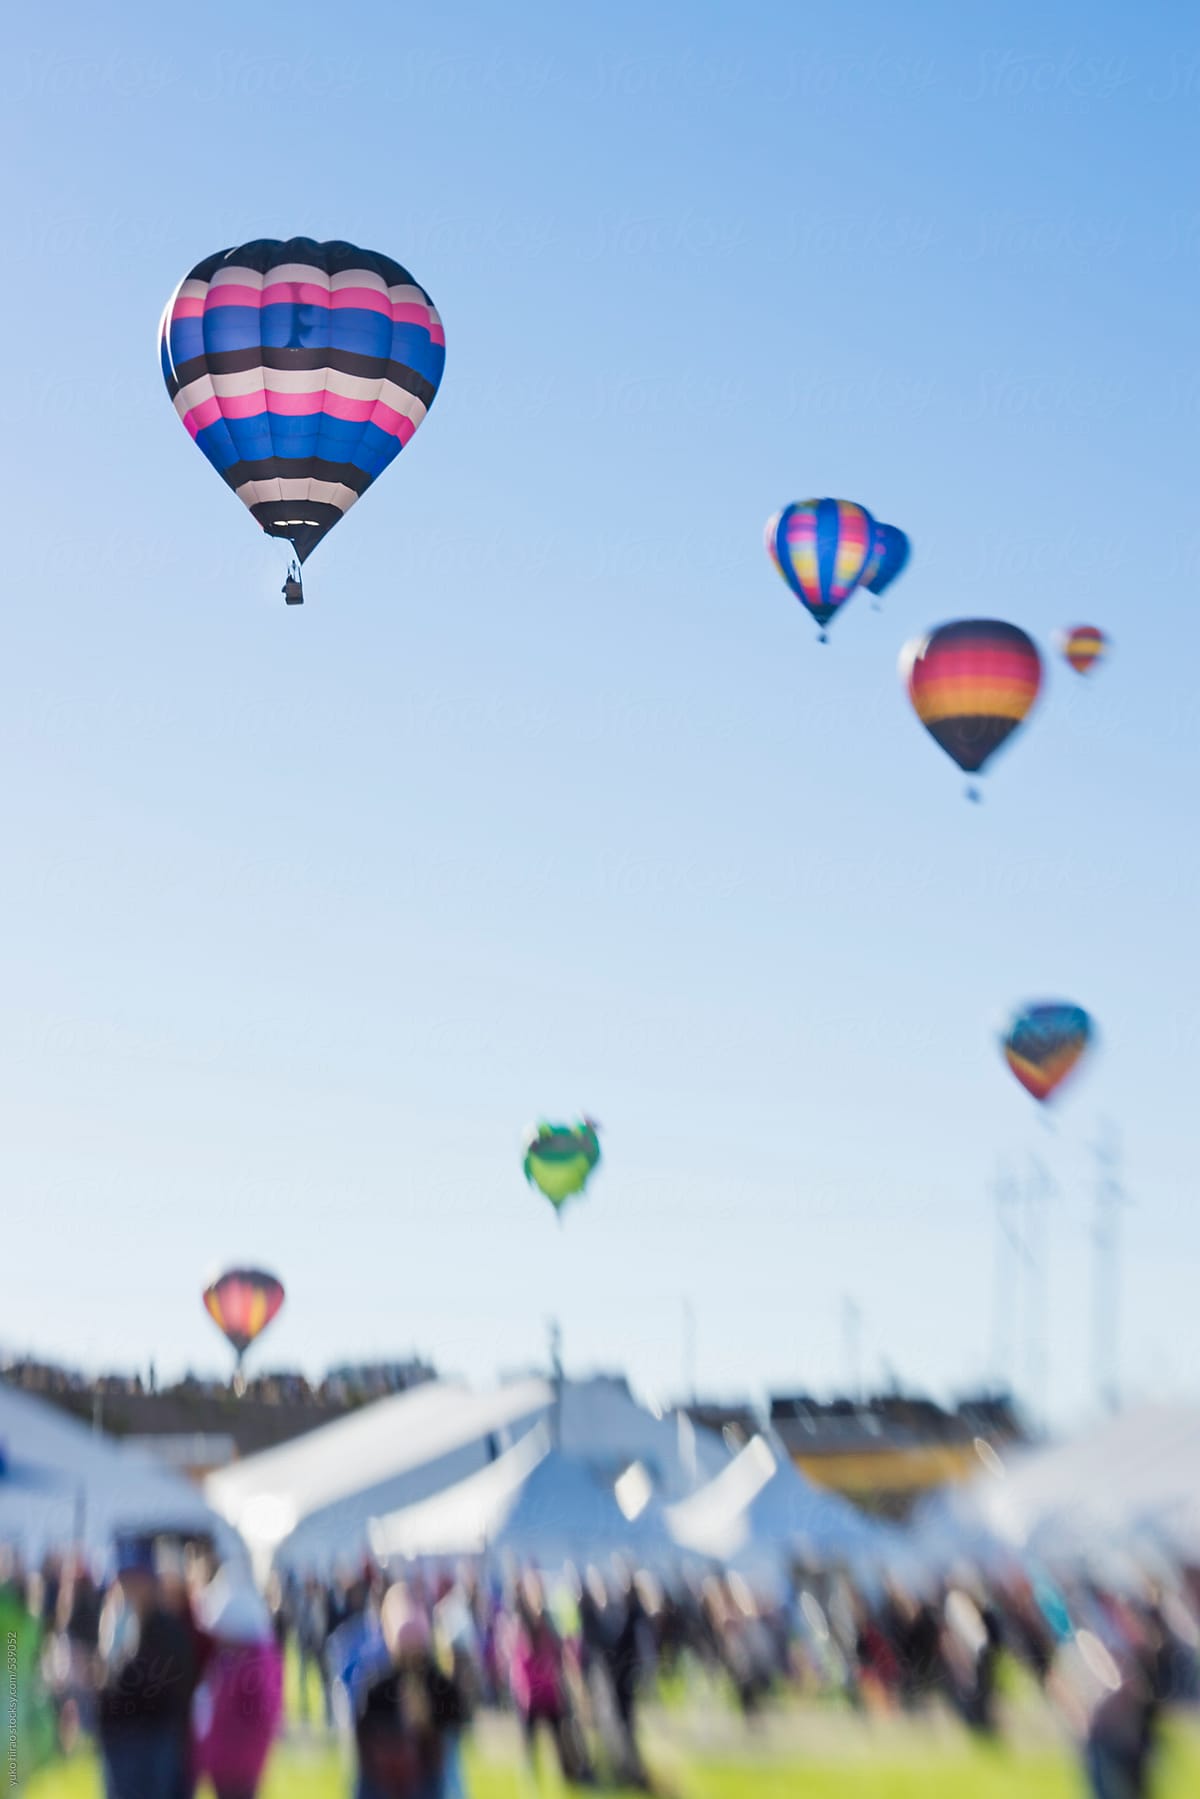 Hot air balloons flying over people at a festival